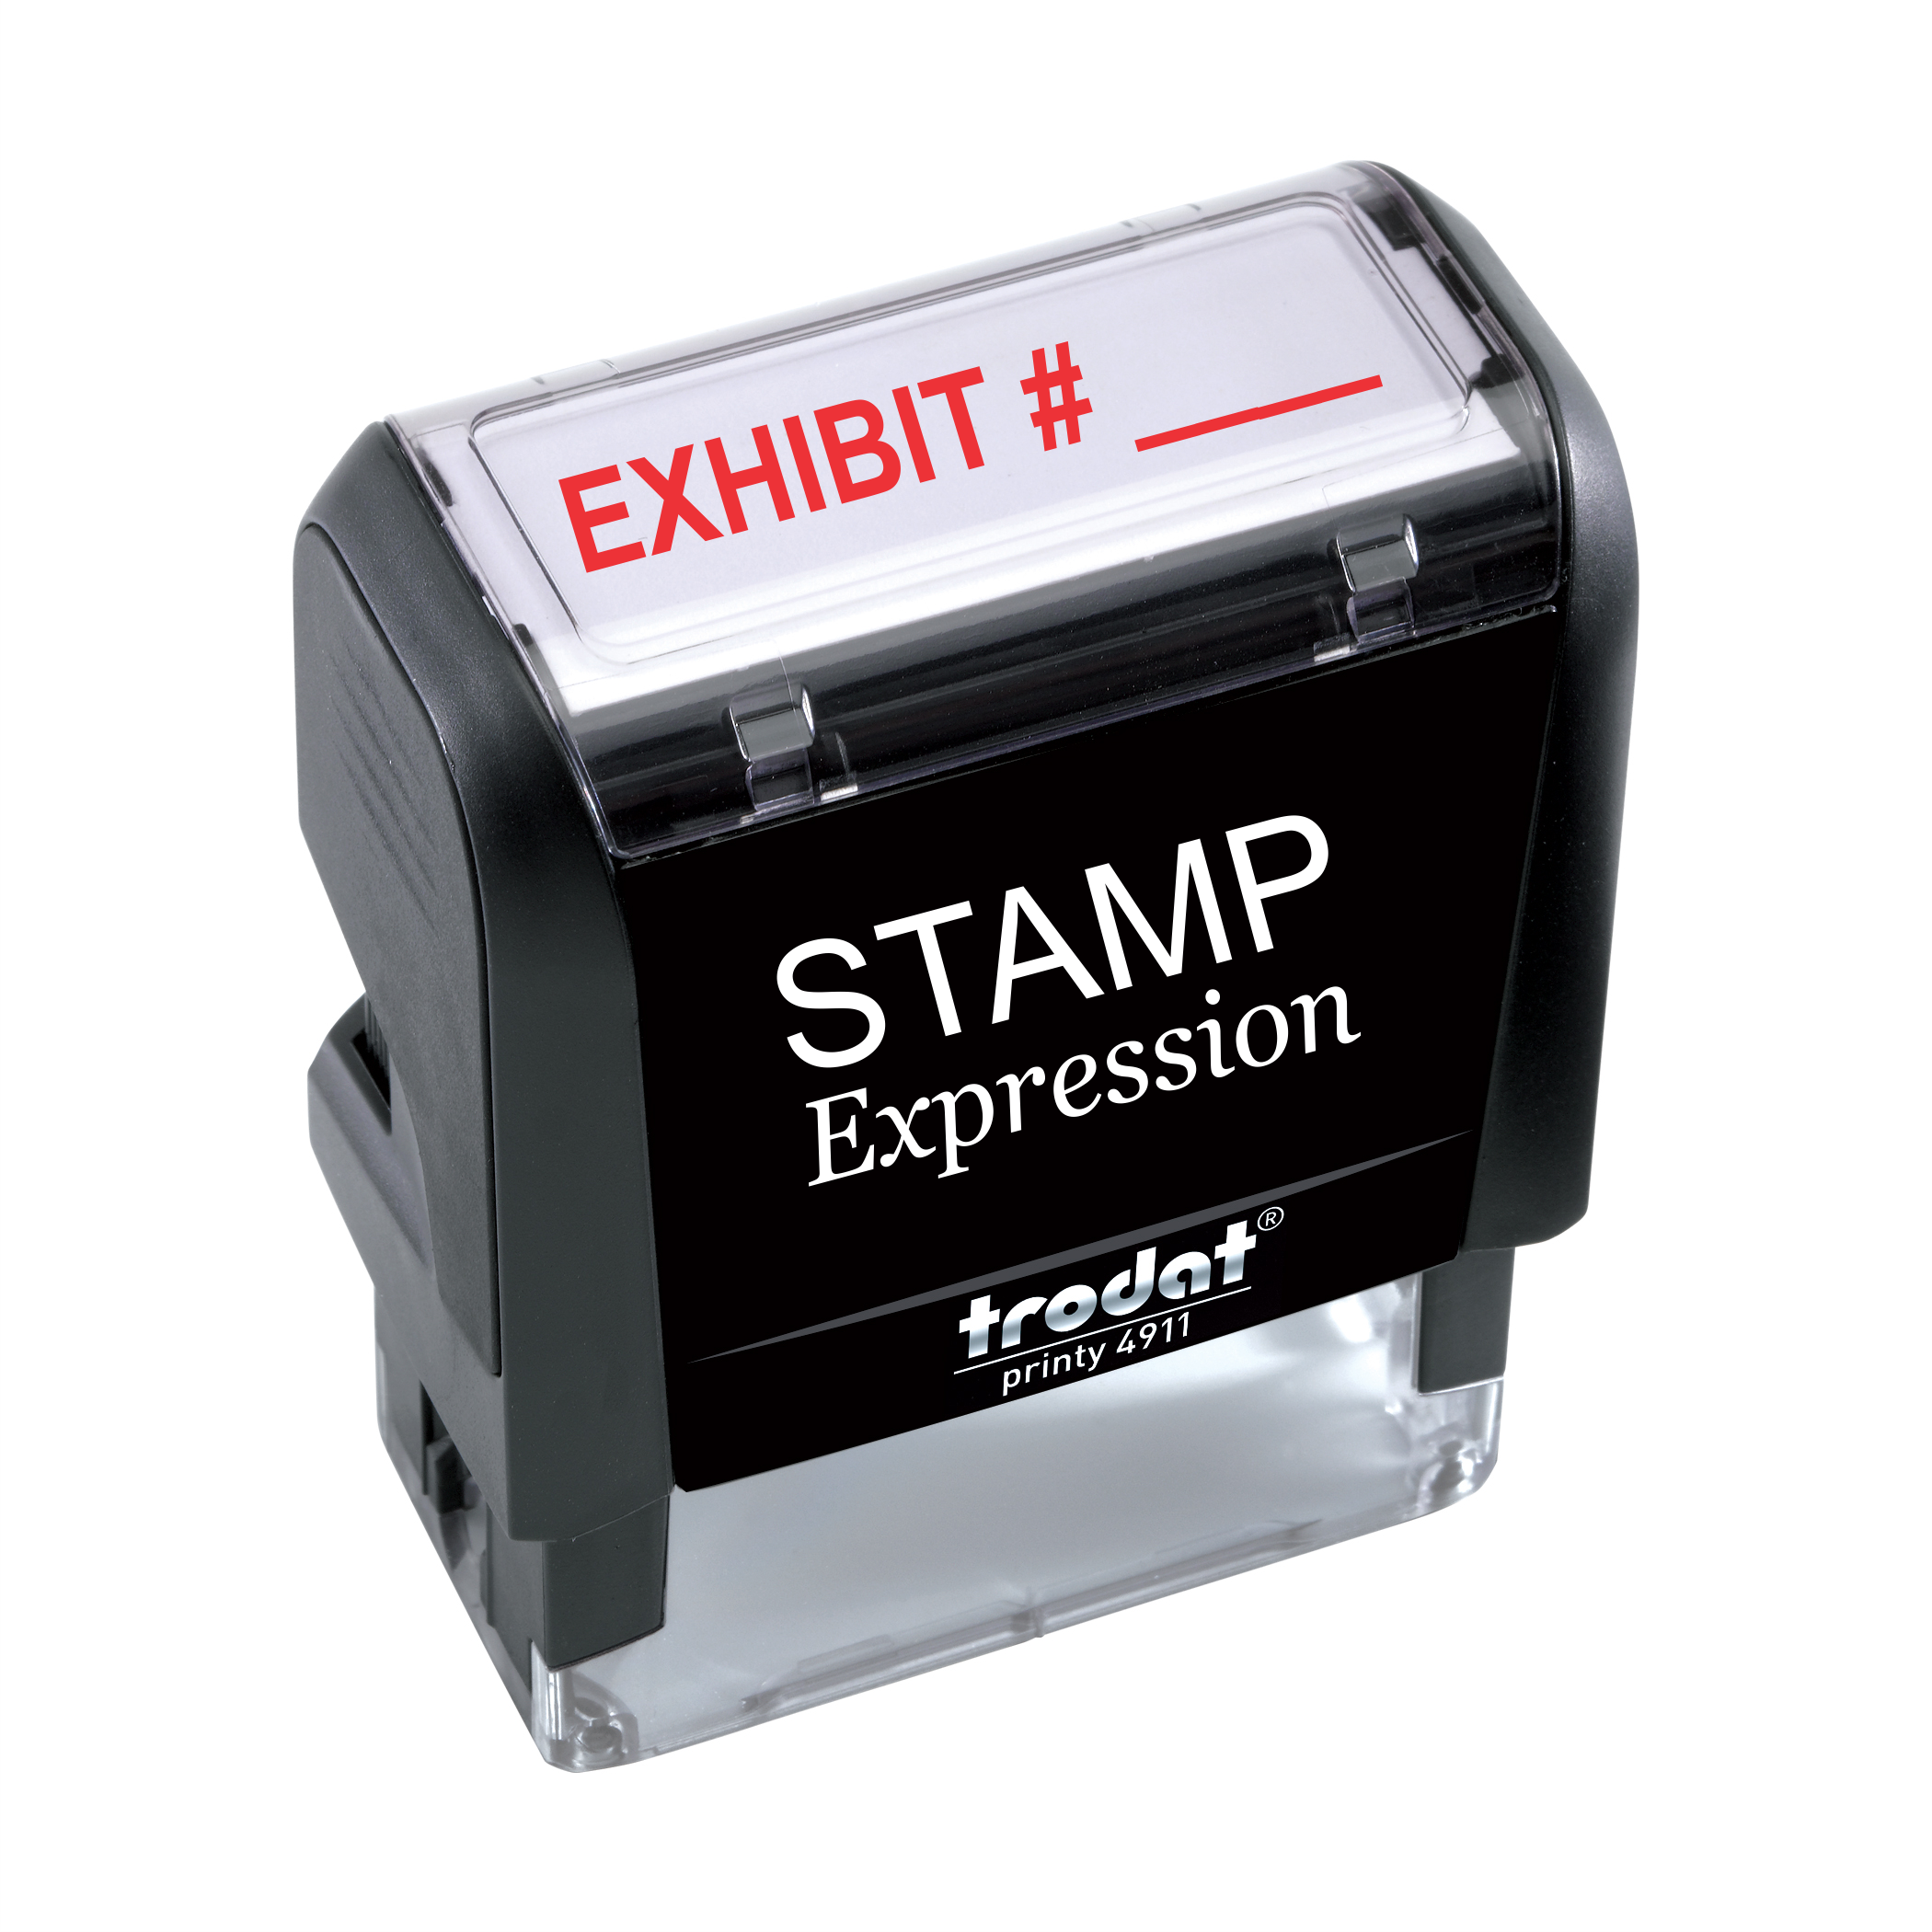 Exhibit # Office Self Inking Rubber Stamp